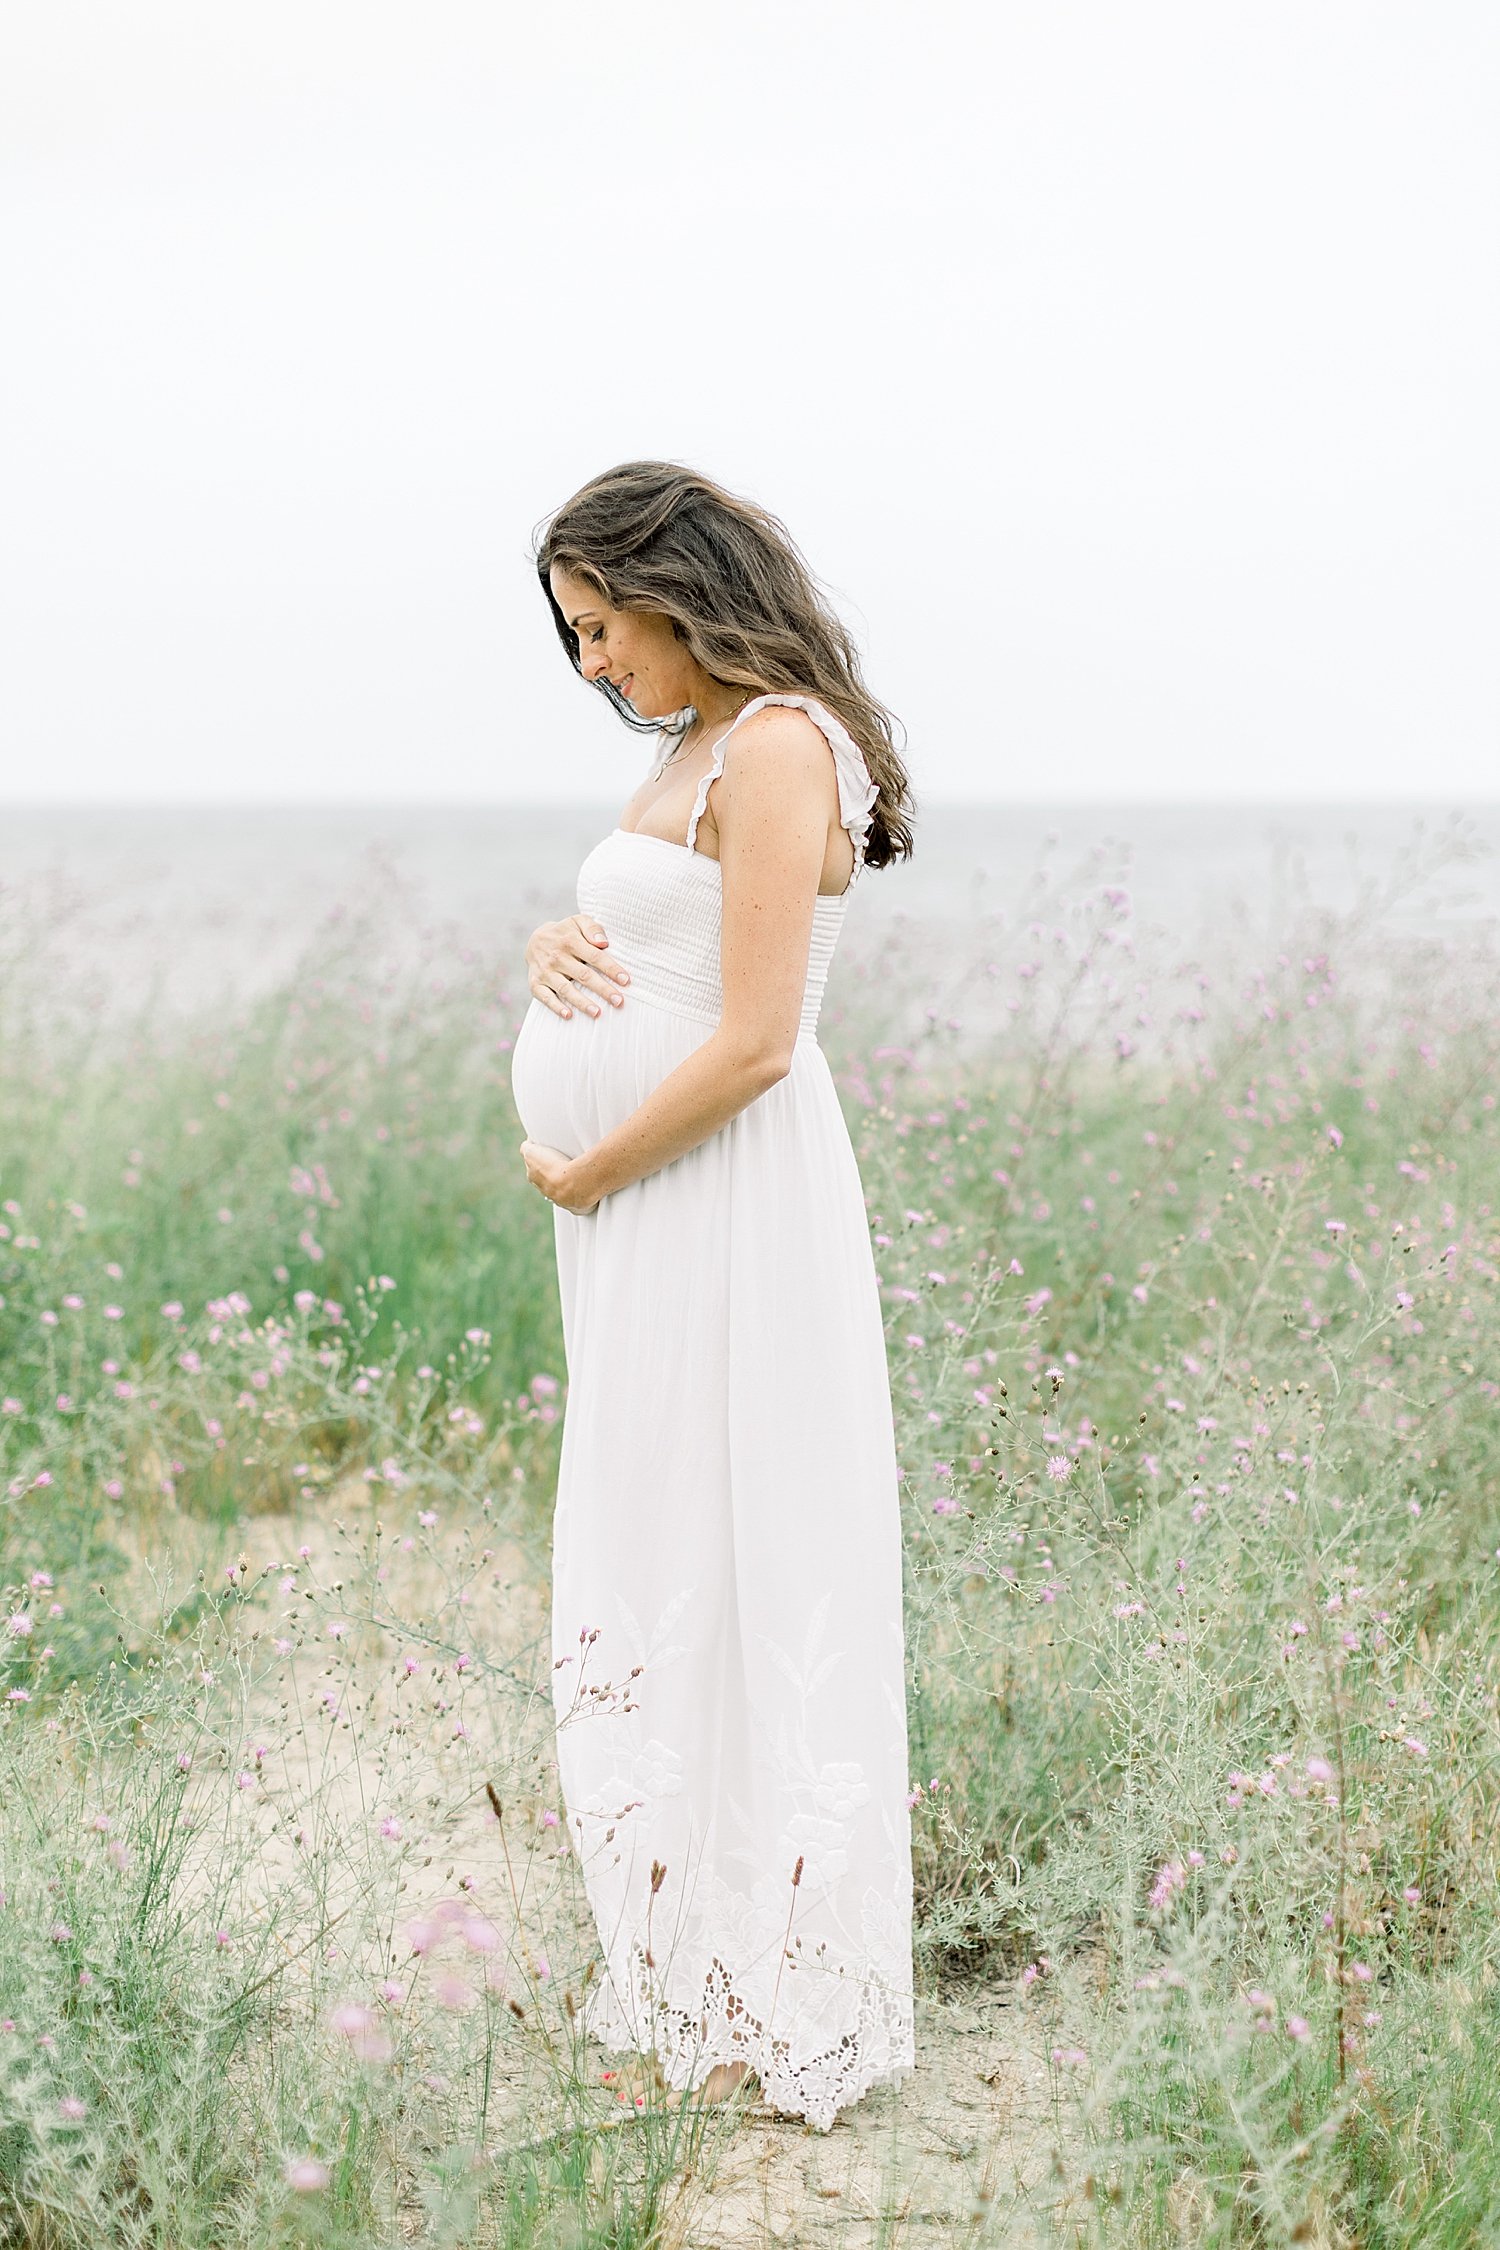 Beach maternity session in CT | Kristin Wood Photography